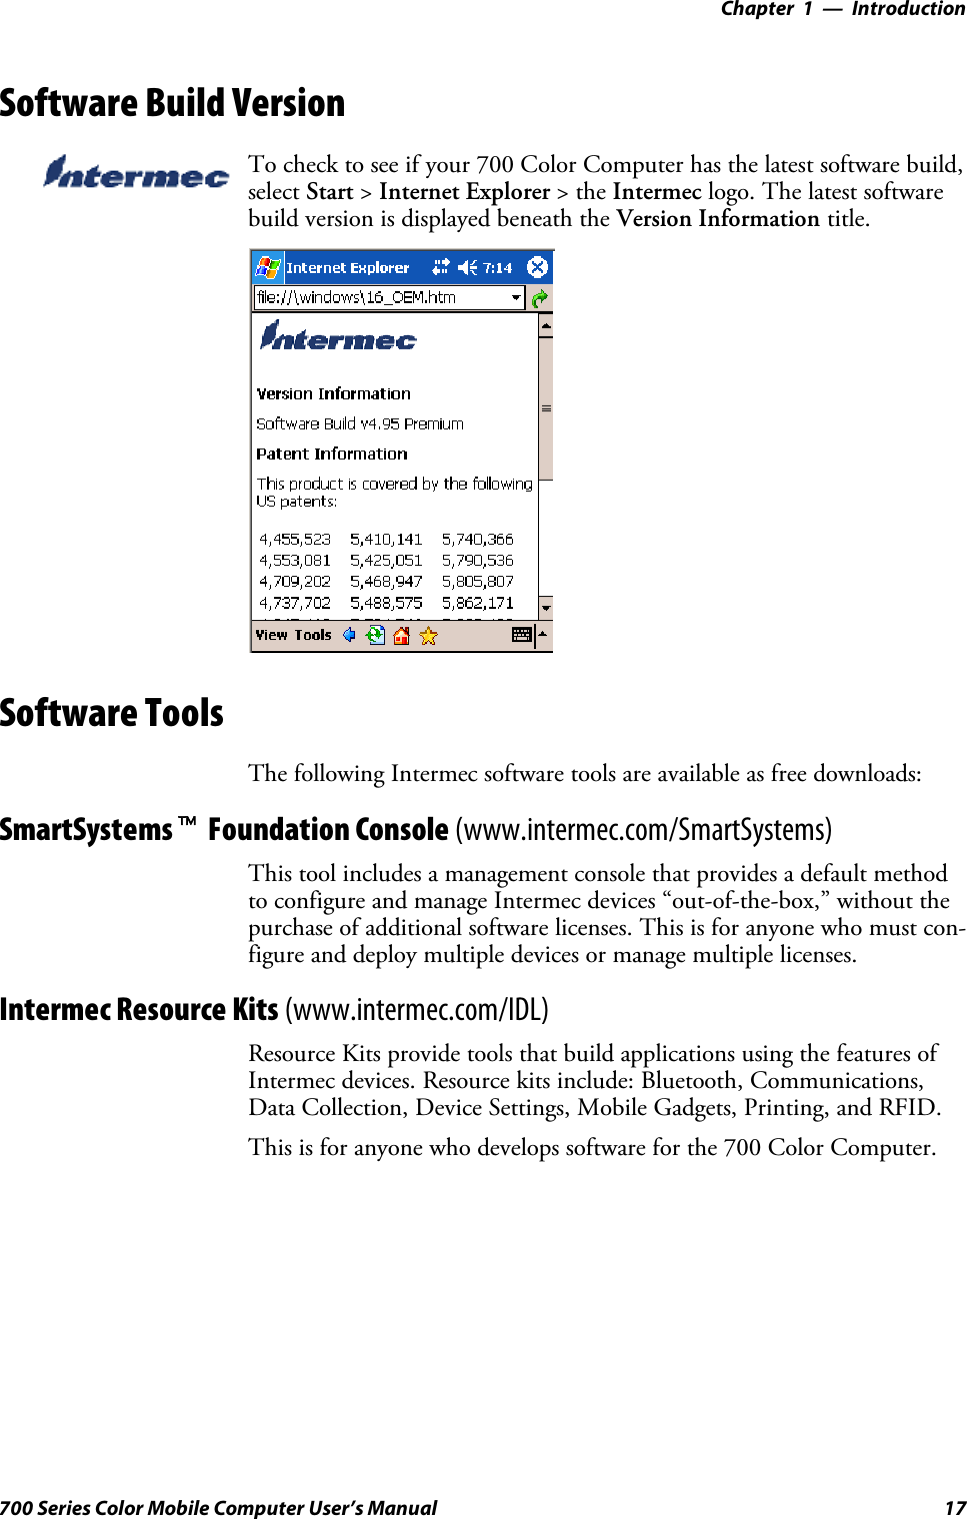 Introduction—Chapter 117700 Series Color Mobile Computer User’s ManualSoftware Build VersionTo check to see if your 700 Color Computer has the latest software build,select Start &gt;Internet Explorer &gt;theIntermec logo. The latest softwarebuild version is displayed beneath the Version Information title.Software ToolsThe following Intermec software tools are available as free downloads:SmartSystemstFoundation Console (www.intermec.com/SmartSystems)This tool includes a management console that provides a default methodto configure and manage Intermec devices “out-of-the-box,” without thepurchase of additional software licenses. This is for anyone who must con-figure and deploy multiple devices or manage multiple licenses.Intermec Resource Kits (www.intermec.com/IDL)Resource Kits provide tools that build applications using the features ofIntermec devices. Resource kits include: Bluetooth, Communications,Data Collection, Device Settings, Mobile Gadgets, Printing, and RFID.This is for anyone who develops software for the 700 Color Computer.